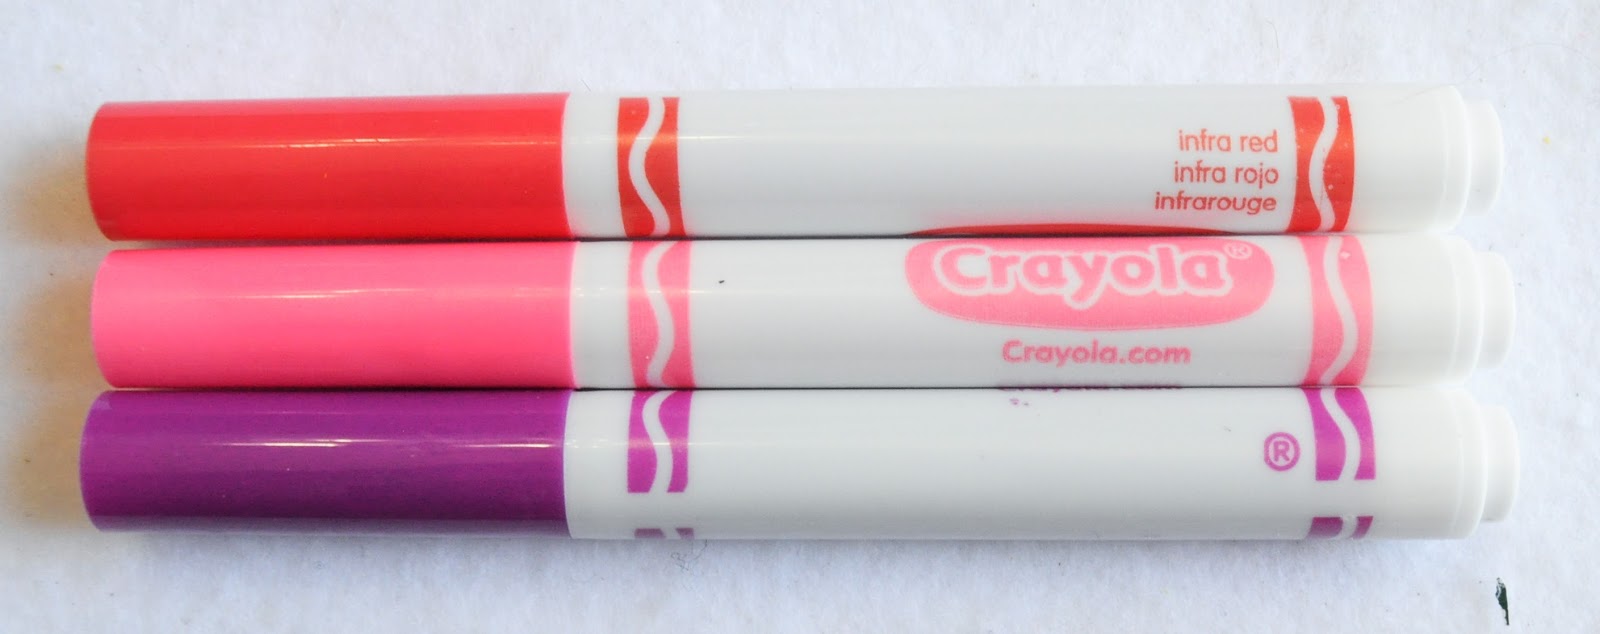 Crayola Broad Line Markers: What's Inside the Box | Jenny's Crayon